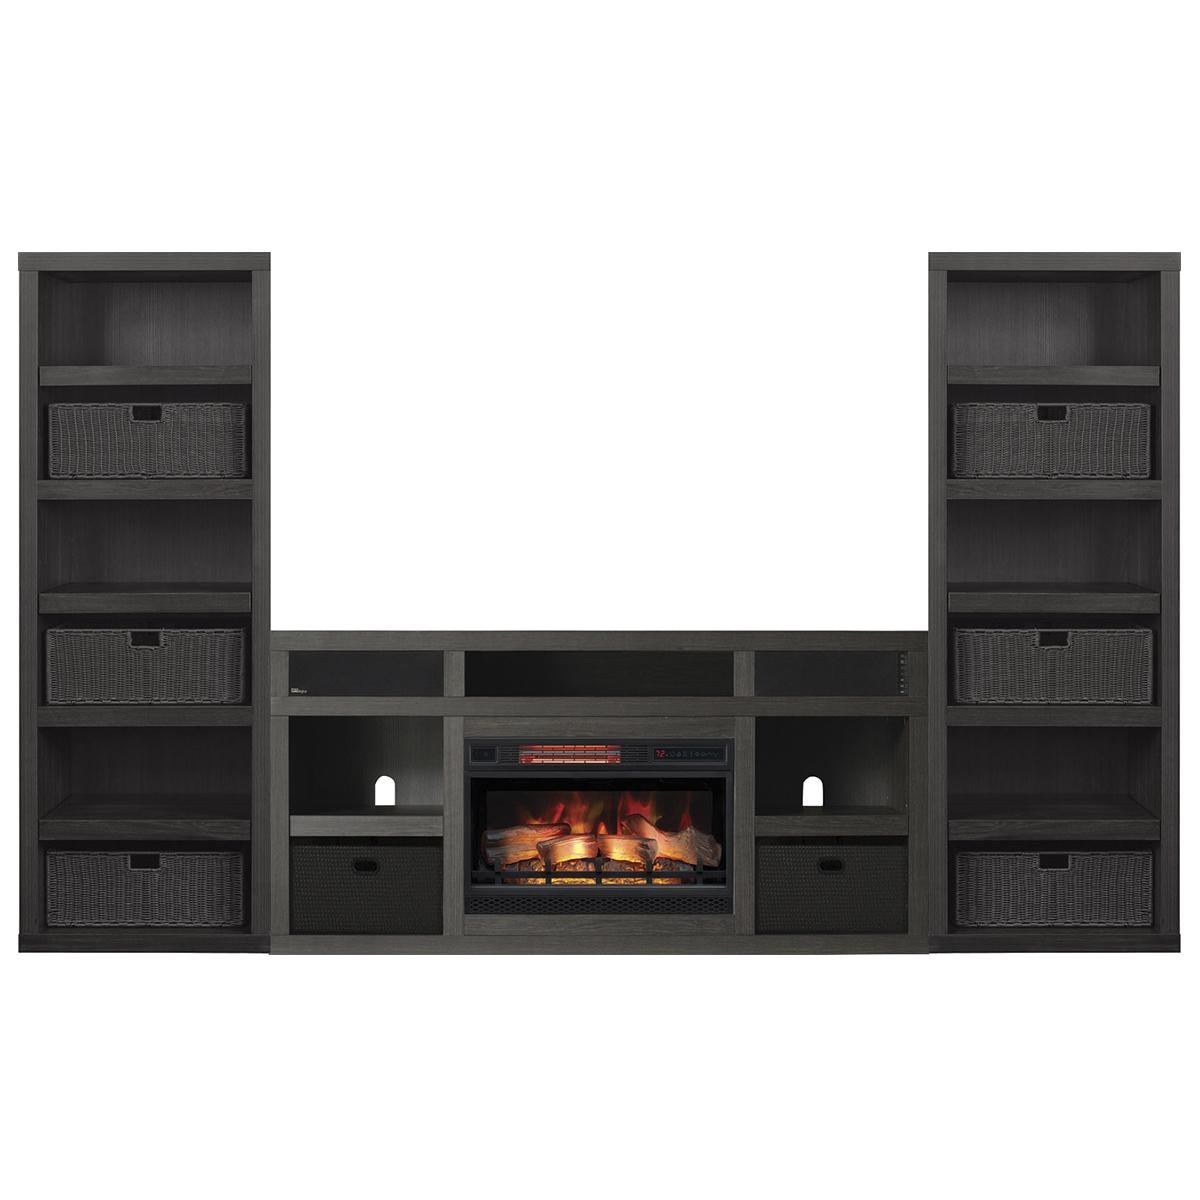 65 Inch Tv Over Fireplace Luxury Fabio Flames Greatlin 3 Piece Fireplace Entertainment Wall